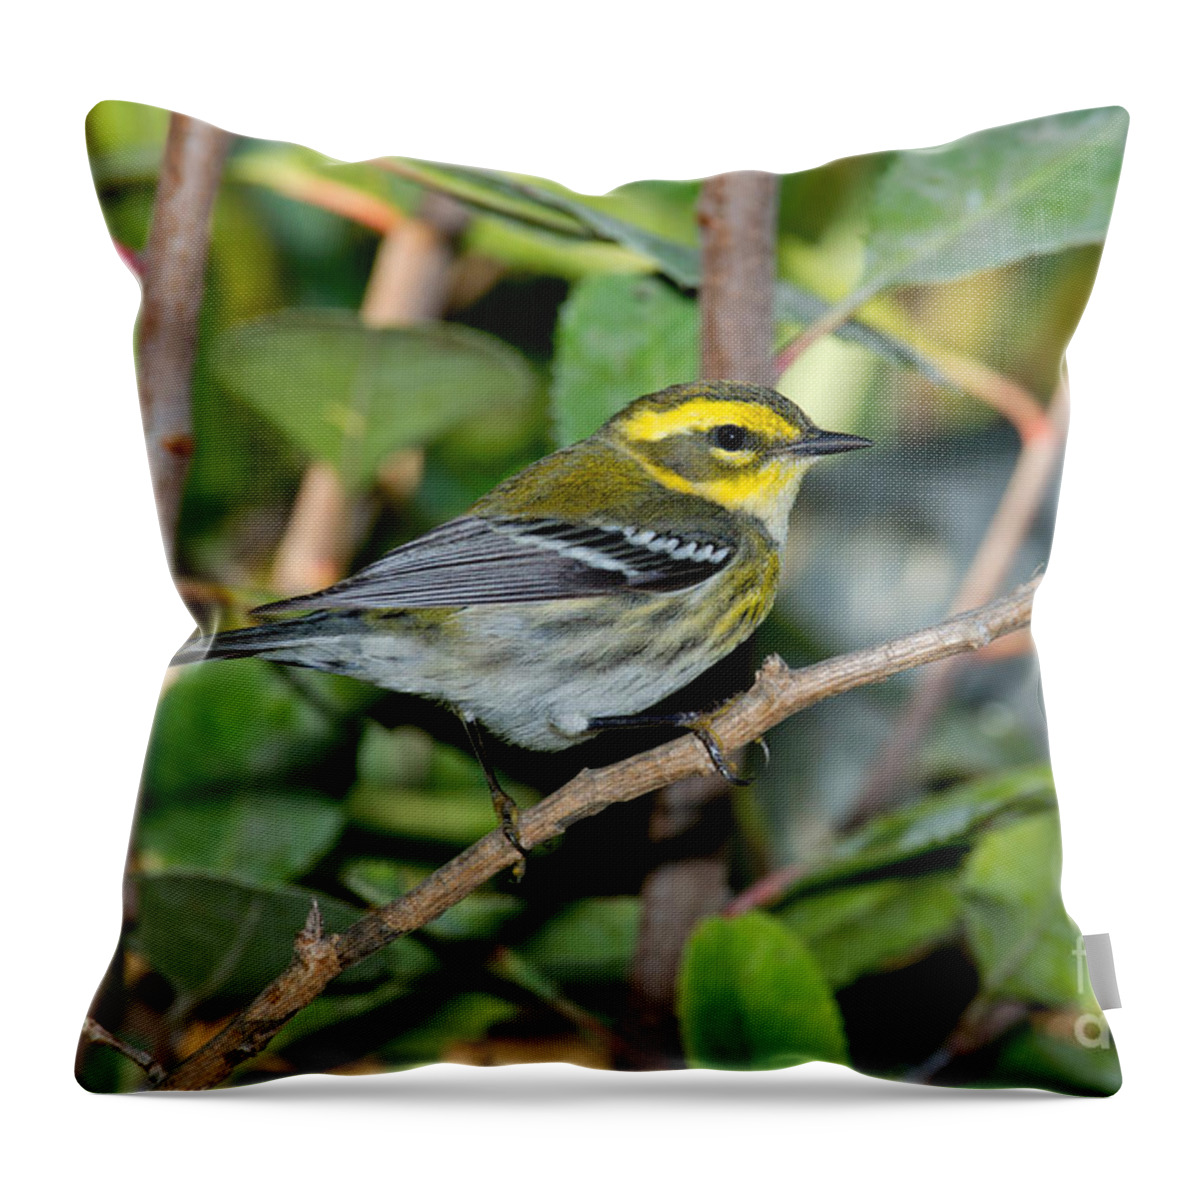 Townsend's Warbler Throw Pillow featuring the photograph Townsends Warbler In Tree by Anthony Mercieca